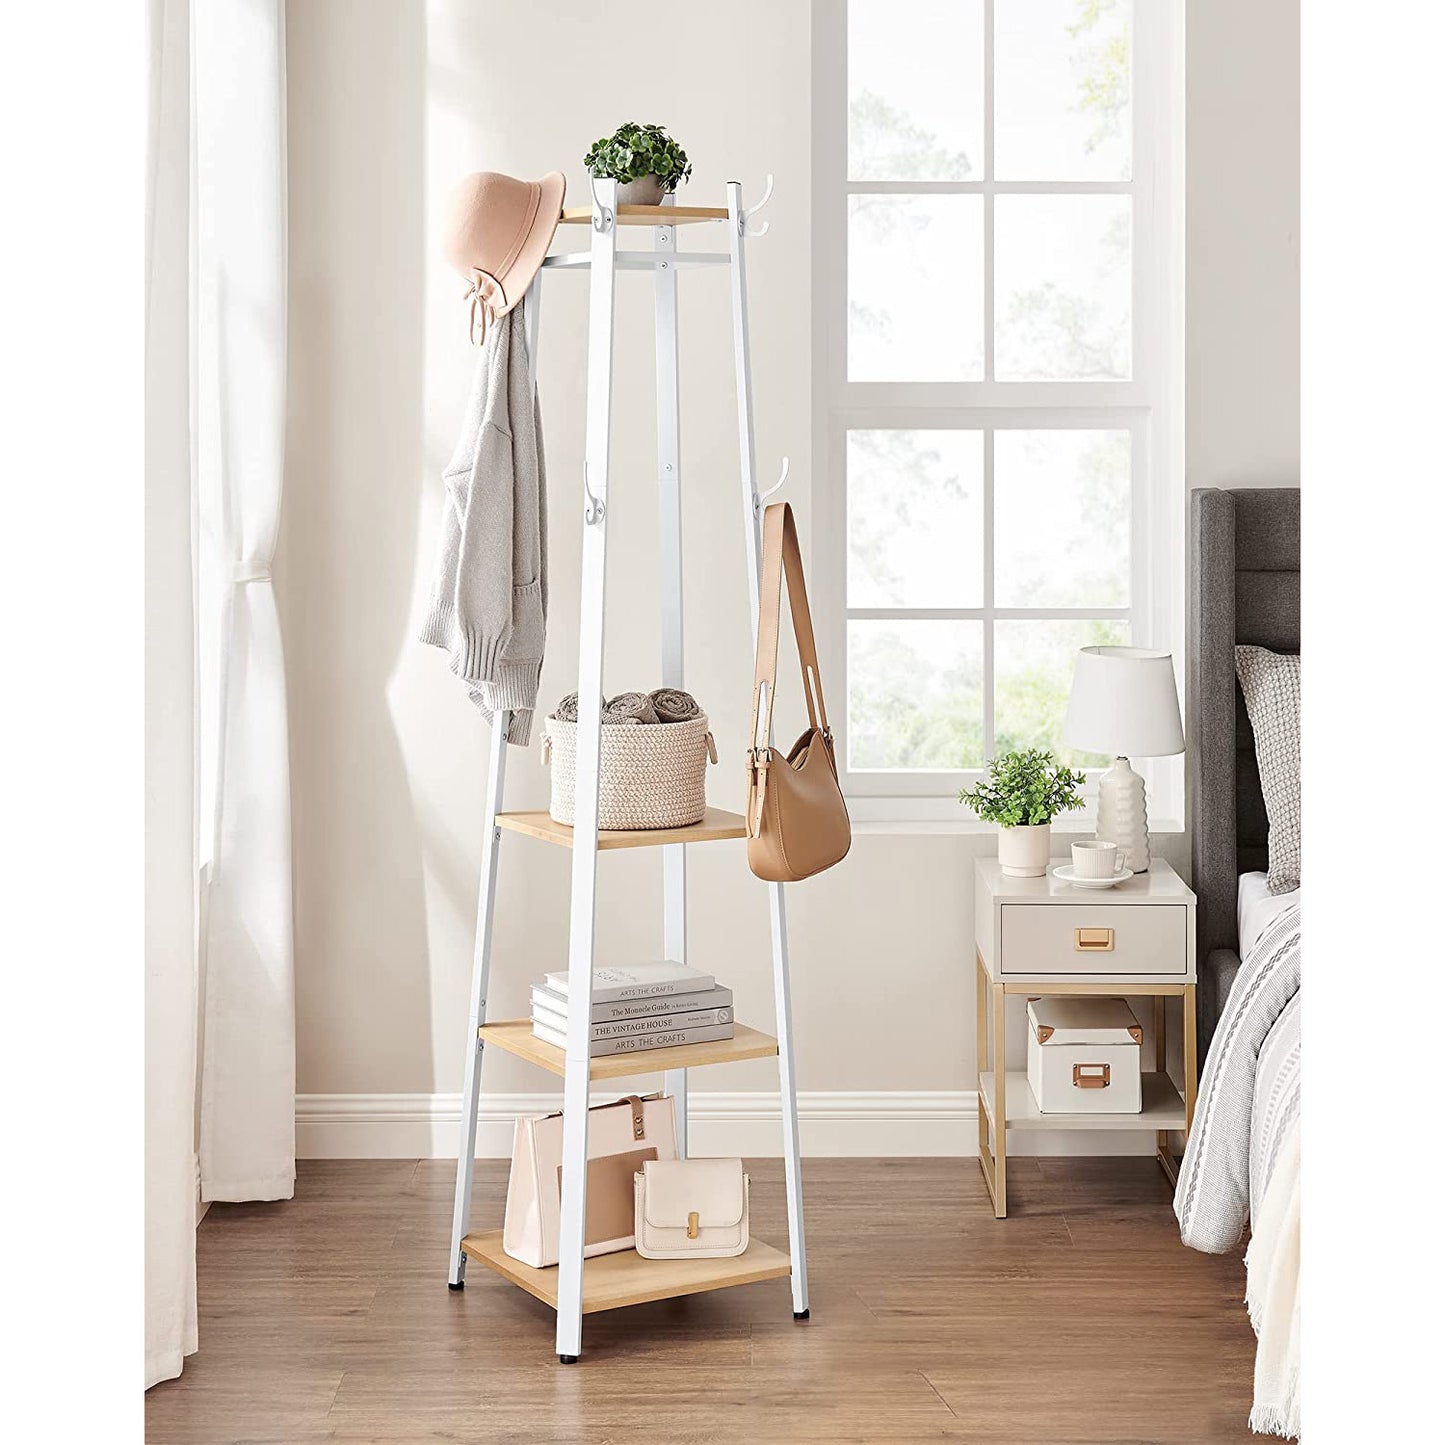 Coat Rack, Coat Rack with with Shelf, Coat Stand, with 3 Shelves, Ladder Shelf with Hooks, Industrial Style, Vasagle, 2